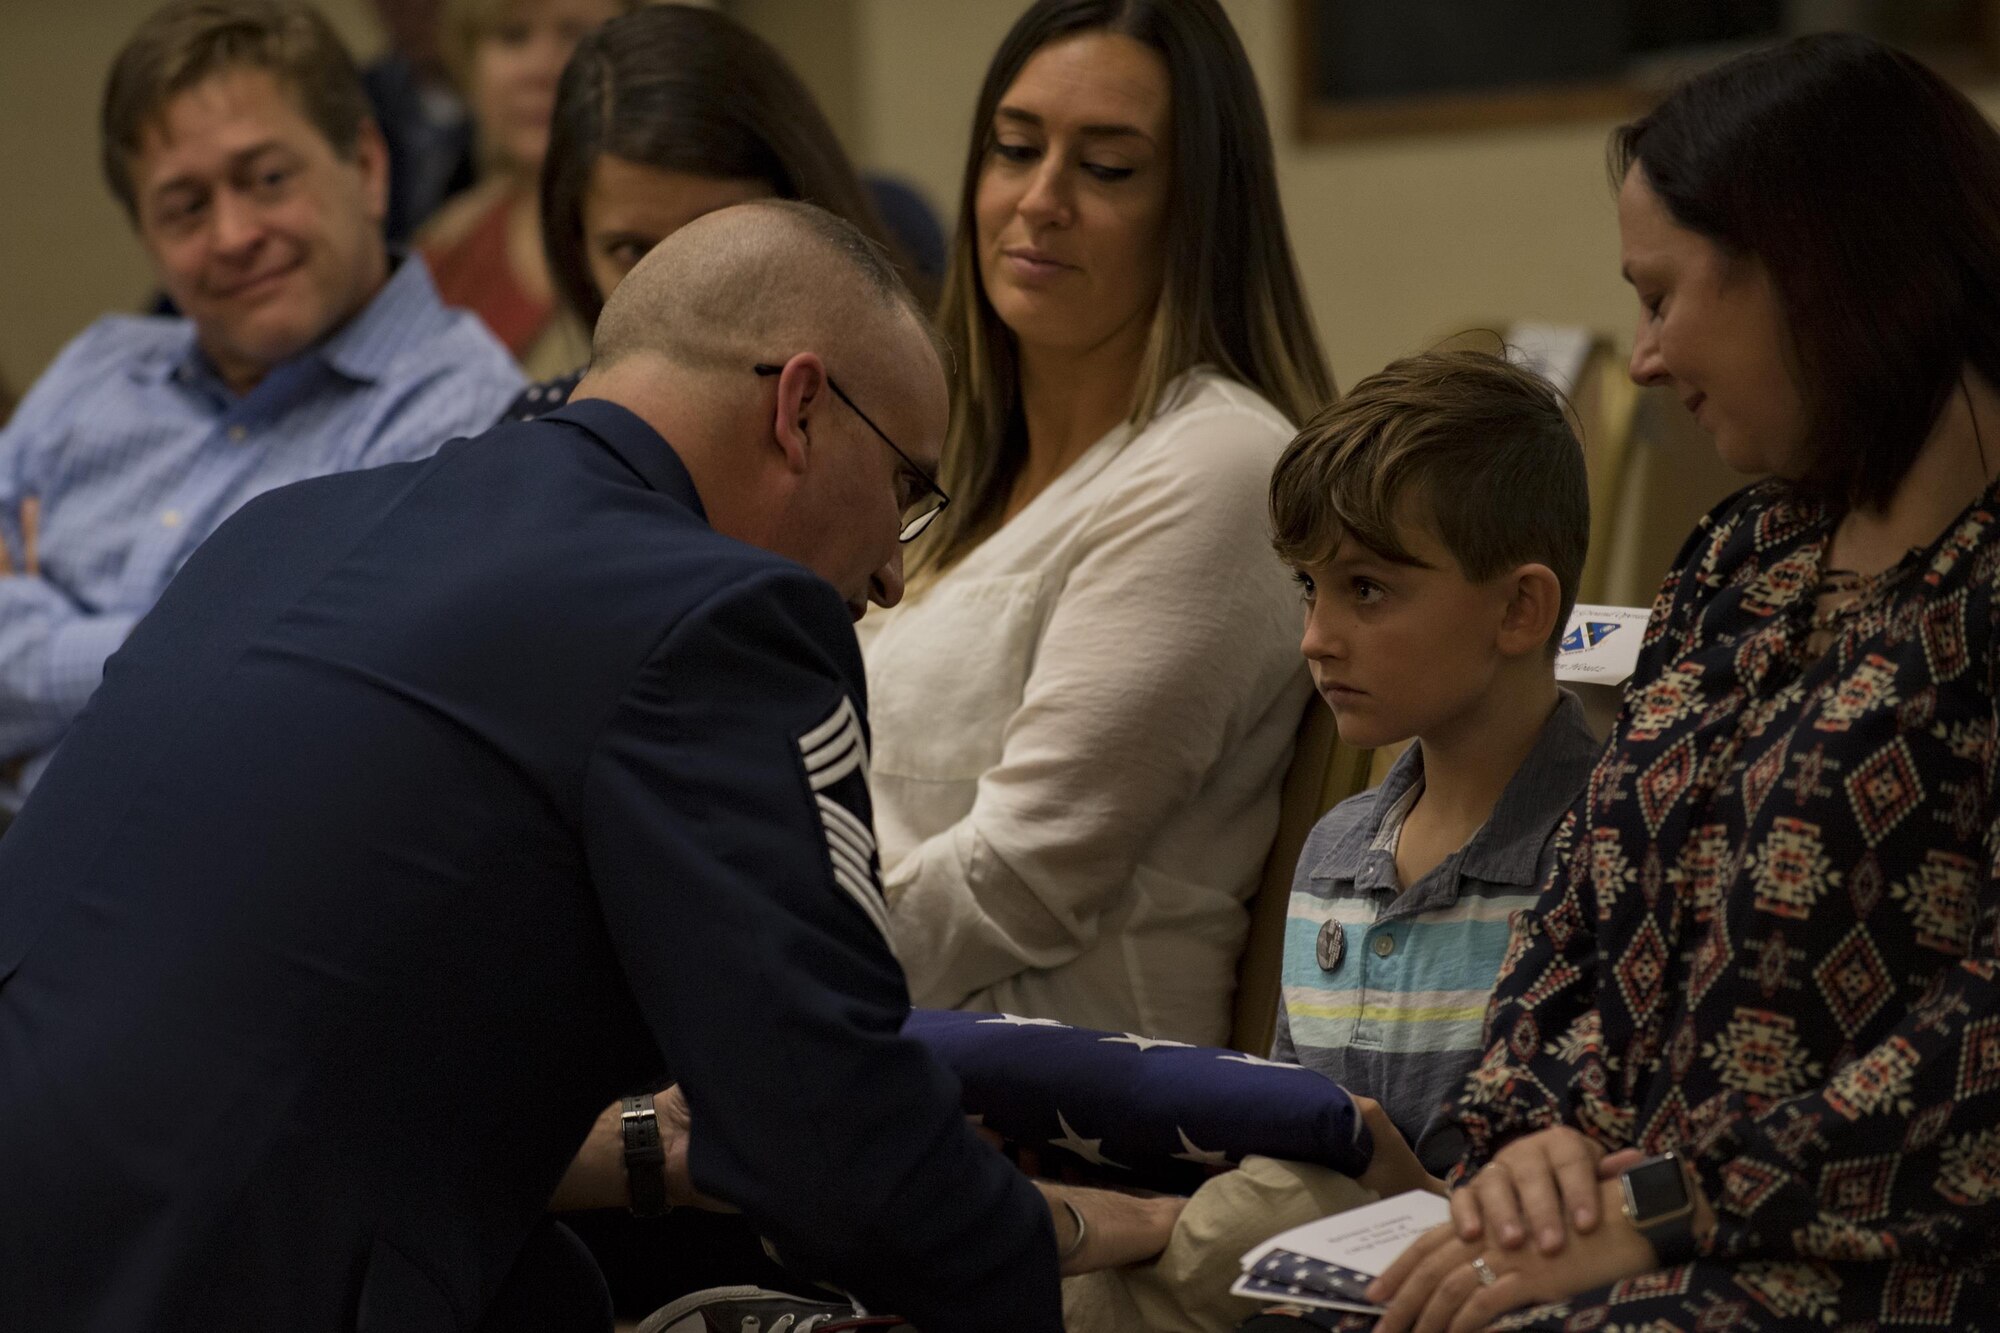 Chief Master Sgt. David Houtz, 823d Base Defense Squadron chief enlisted manager, presents his son, Logan, with a U.S. flag during Houtz’s retirement ceremony, Dec. 1, 2017, at Moody Air Force Base, Ga. Houtz enlisted in the Air Force on Oct. 6, 1991. During his 27-year career, he has held numerous leadership roles while supporting Operations Provide Promise, Southern Watch, Enduring Freedom, Iraqi Freedom and Inherent Resolve. (U.S. Air Force photo by Senior Airman Daniel Snider)